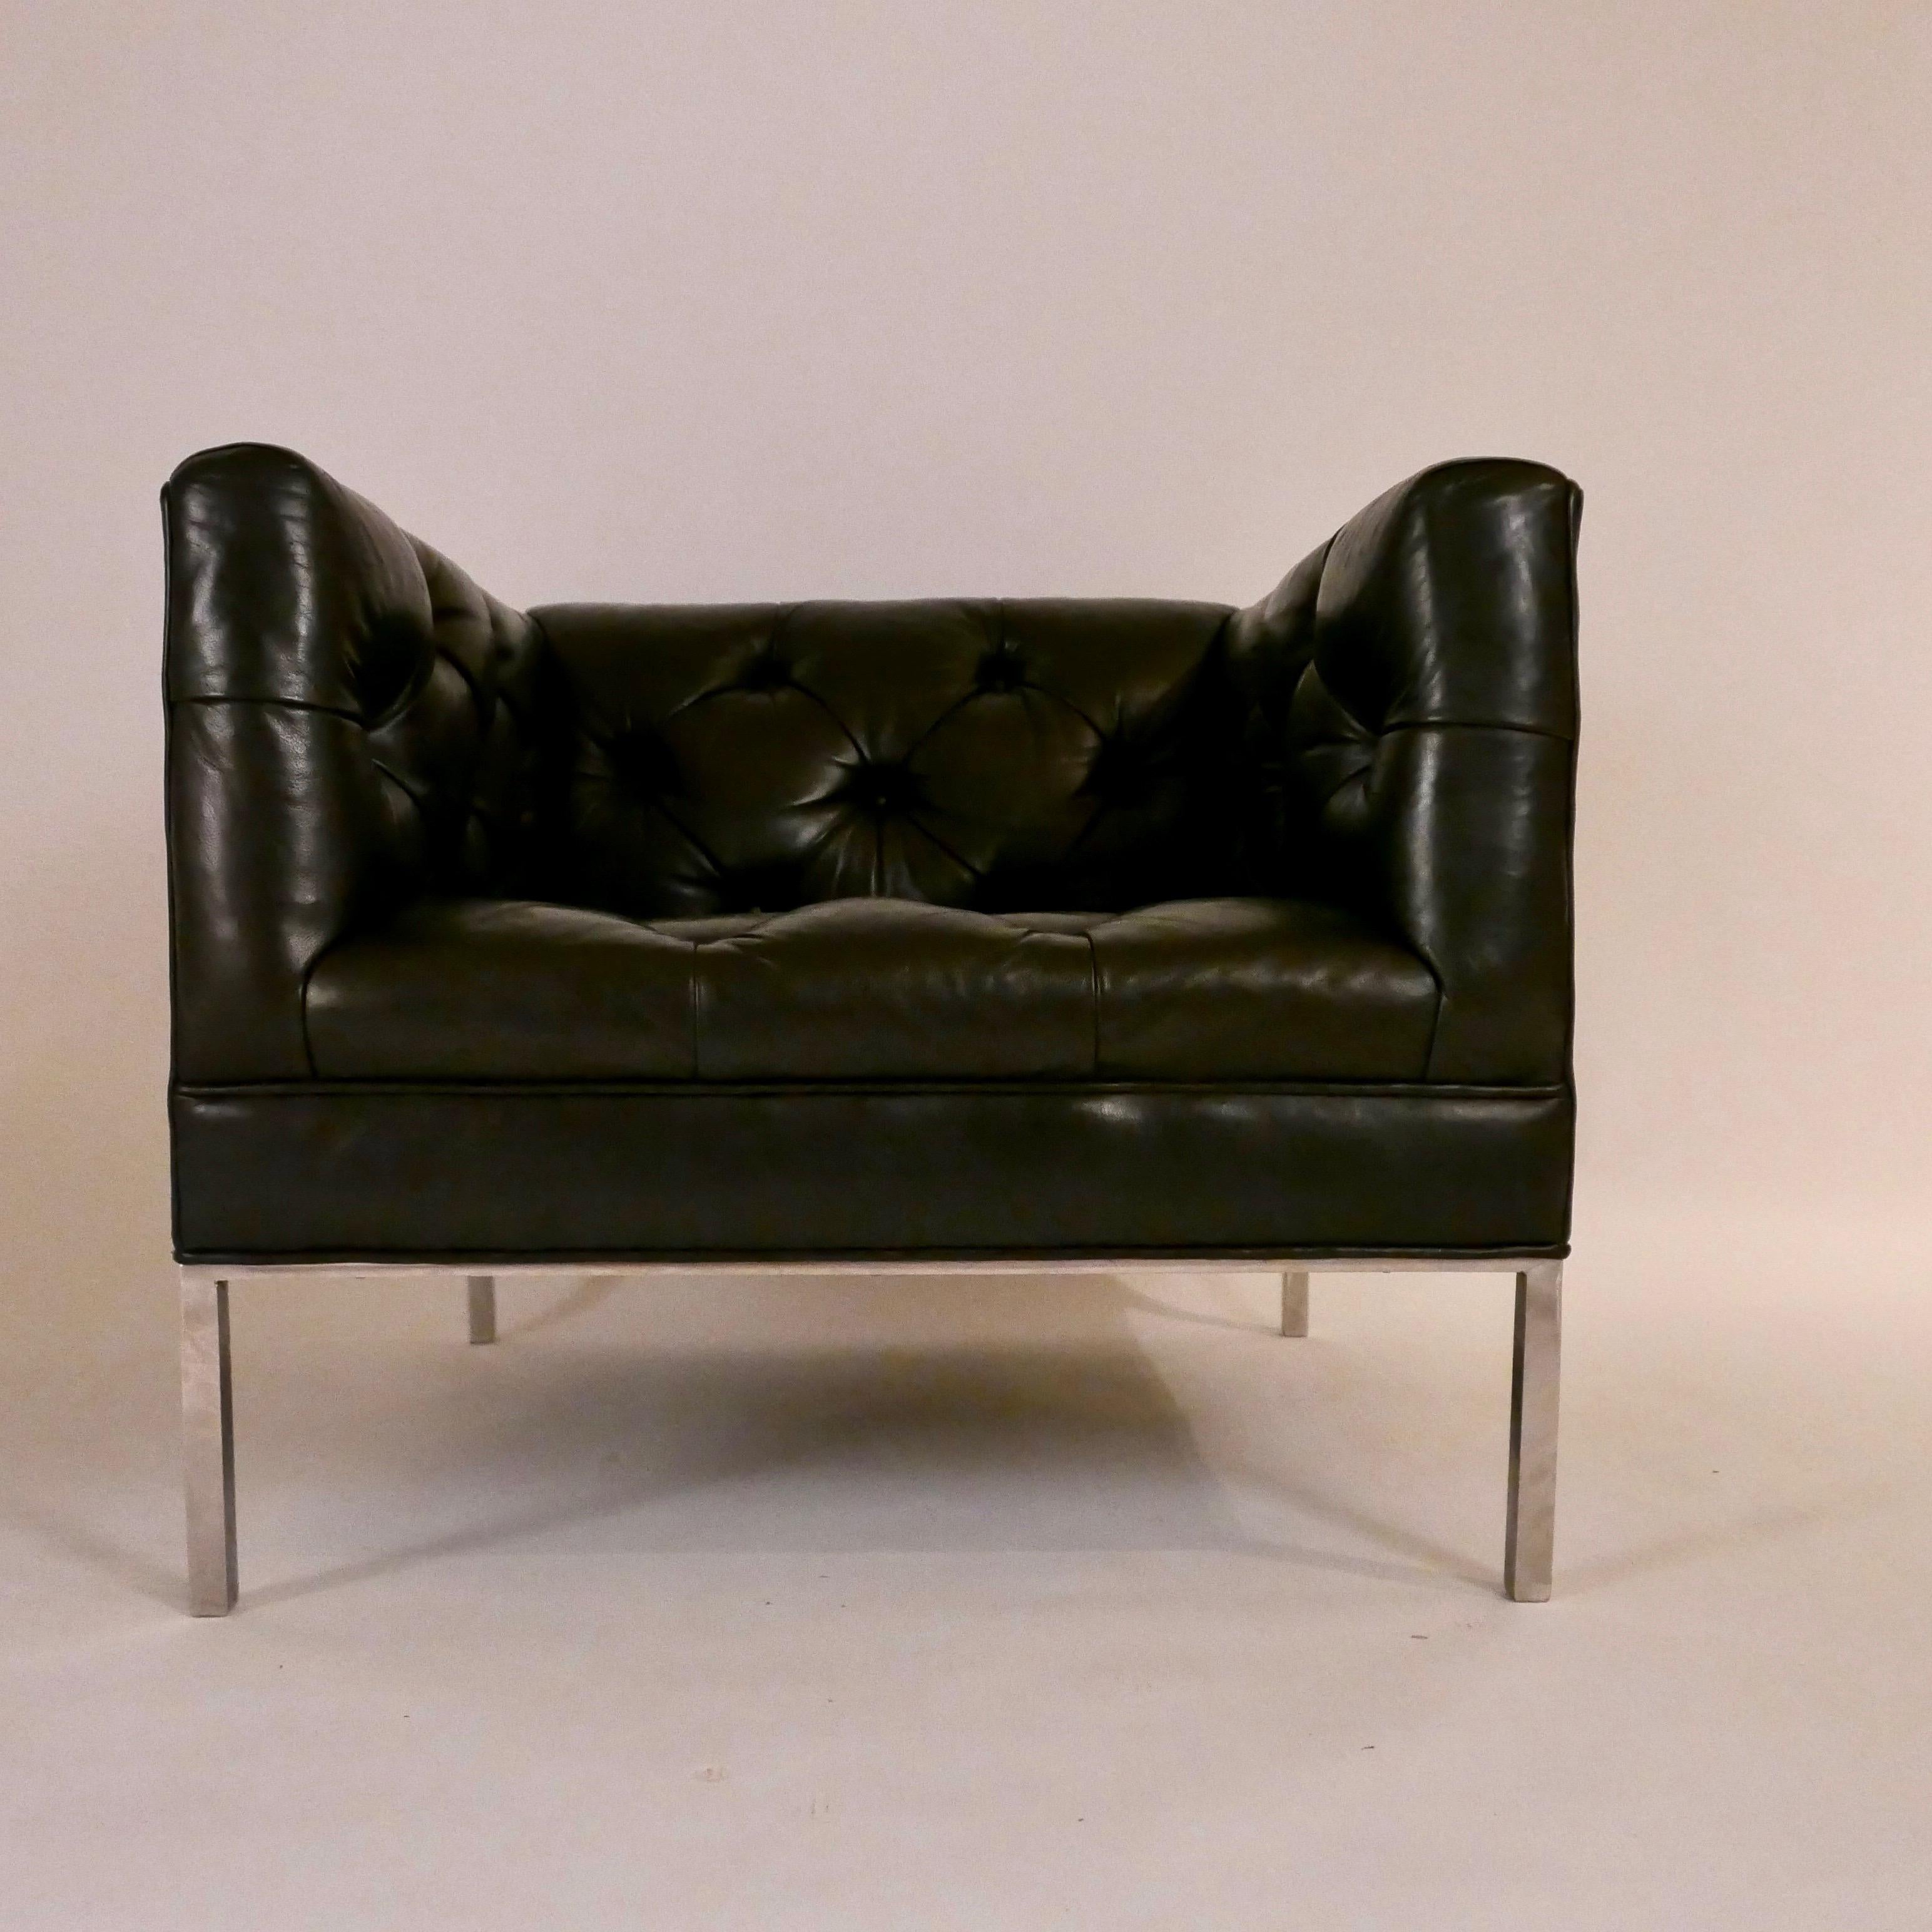 Architect Pair of Tufted Leather and Solid Stainless Steel Tuxedo Club Chairs 2